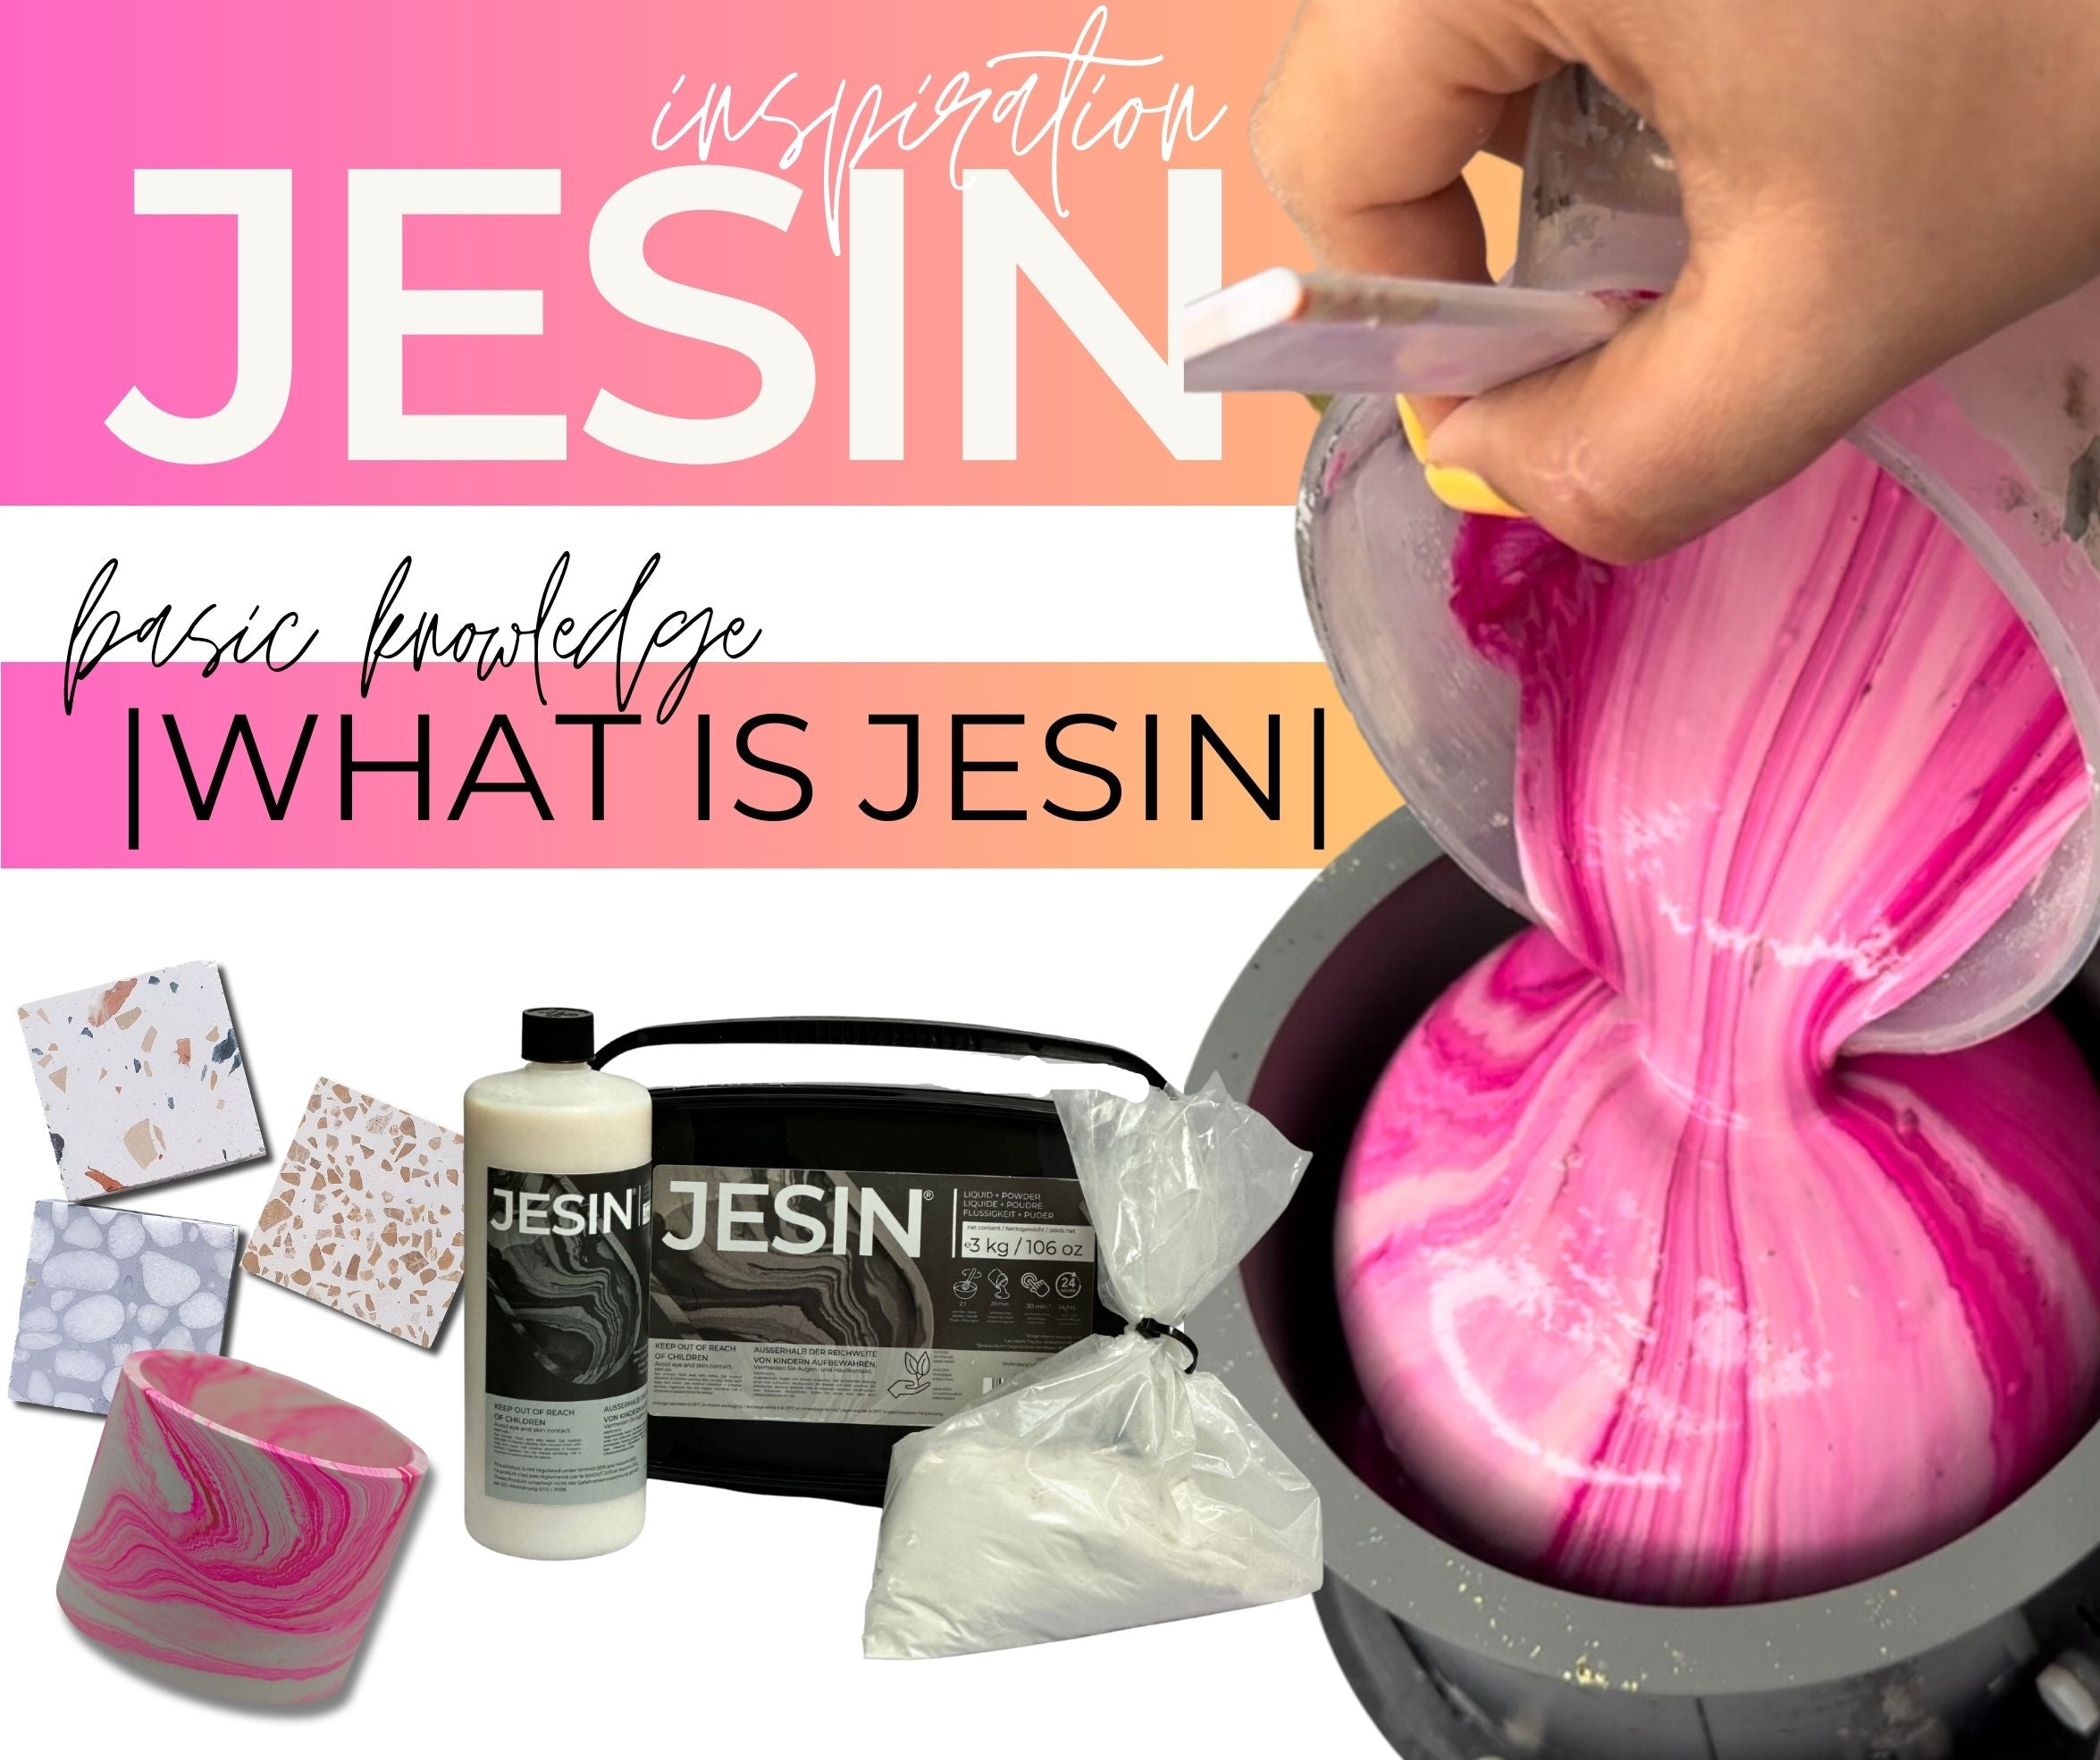 WHAT IS JESIN?